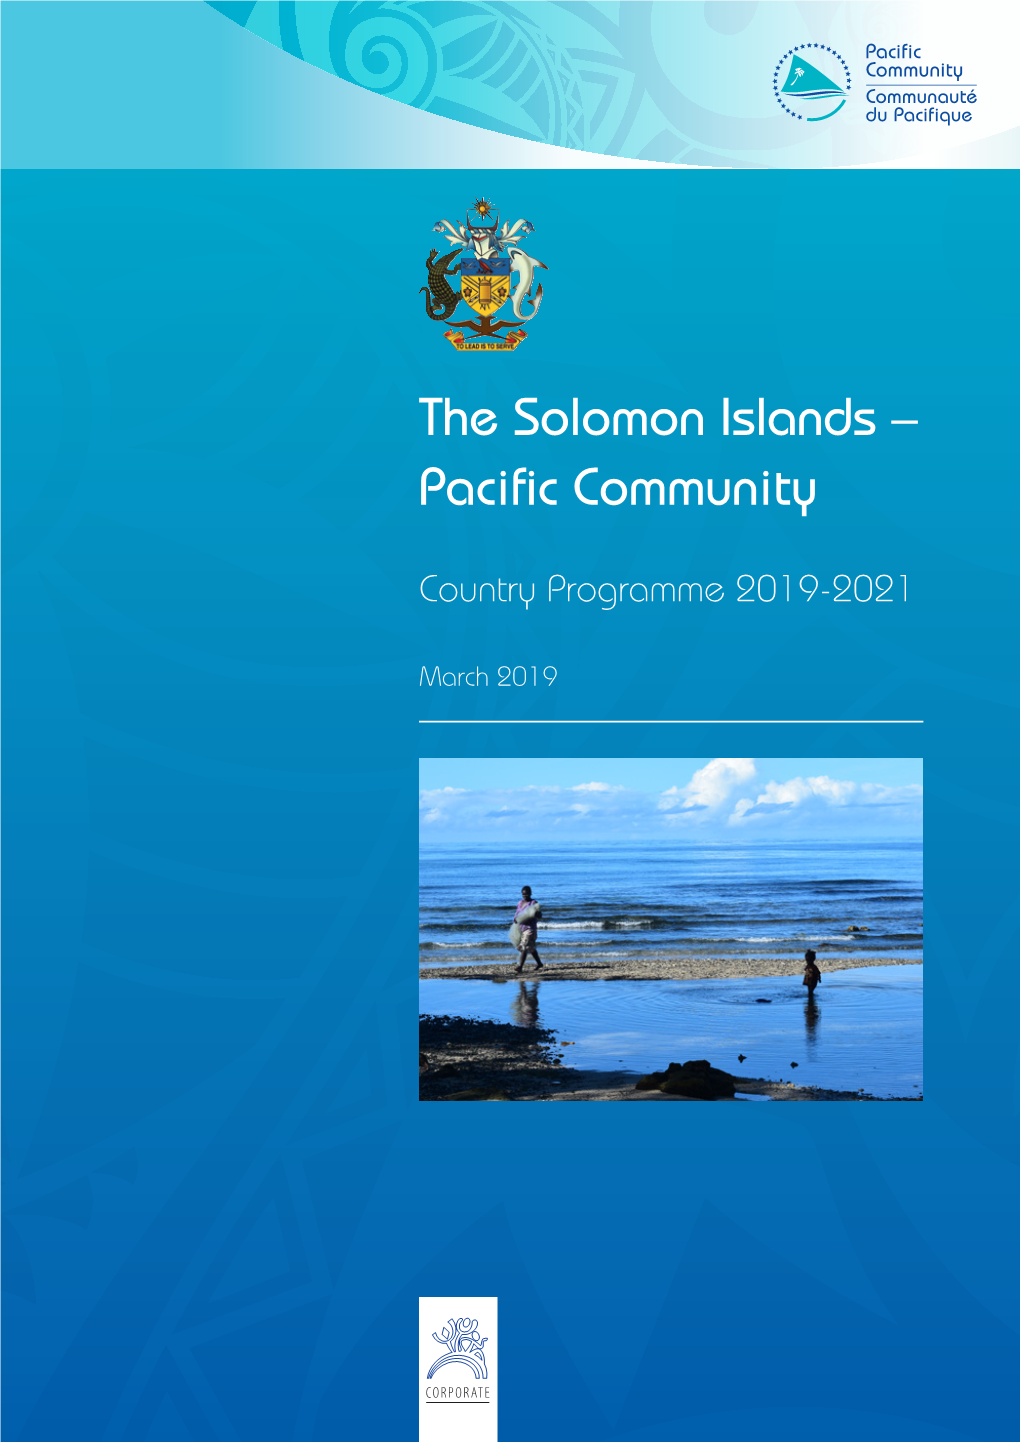 The Solomon Islands – Pacific Community: Country Programme 2019-2021